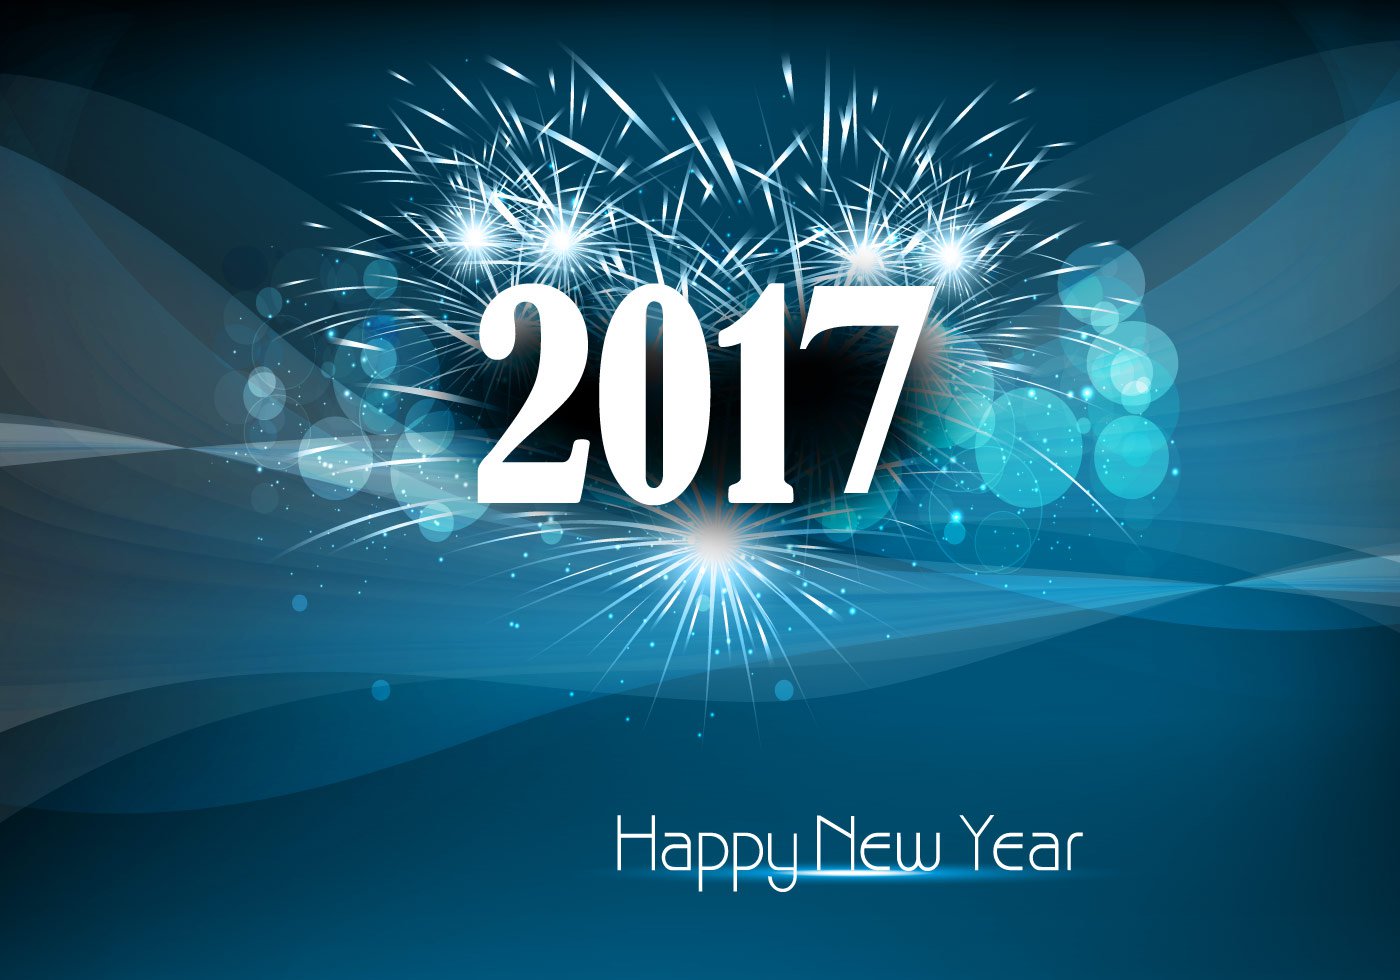 Happy New Year 2017 Card With Gold Star On Black Background - Happy New Year  Star Transparent PNG - 963x917 - Free Download on NicePNG